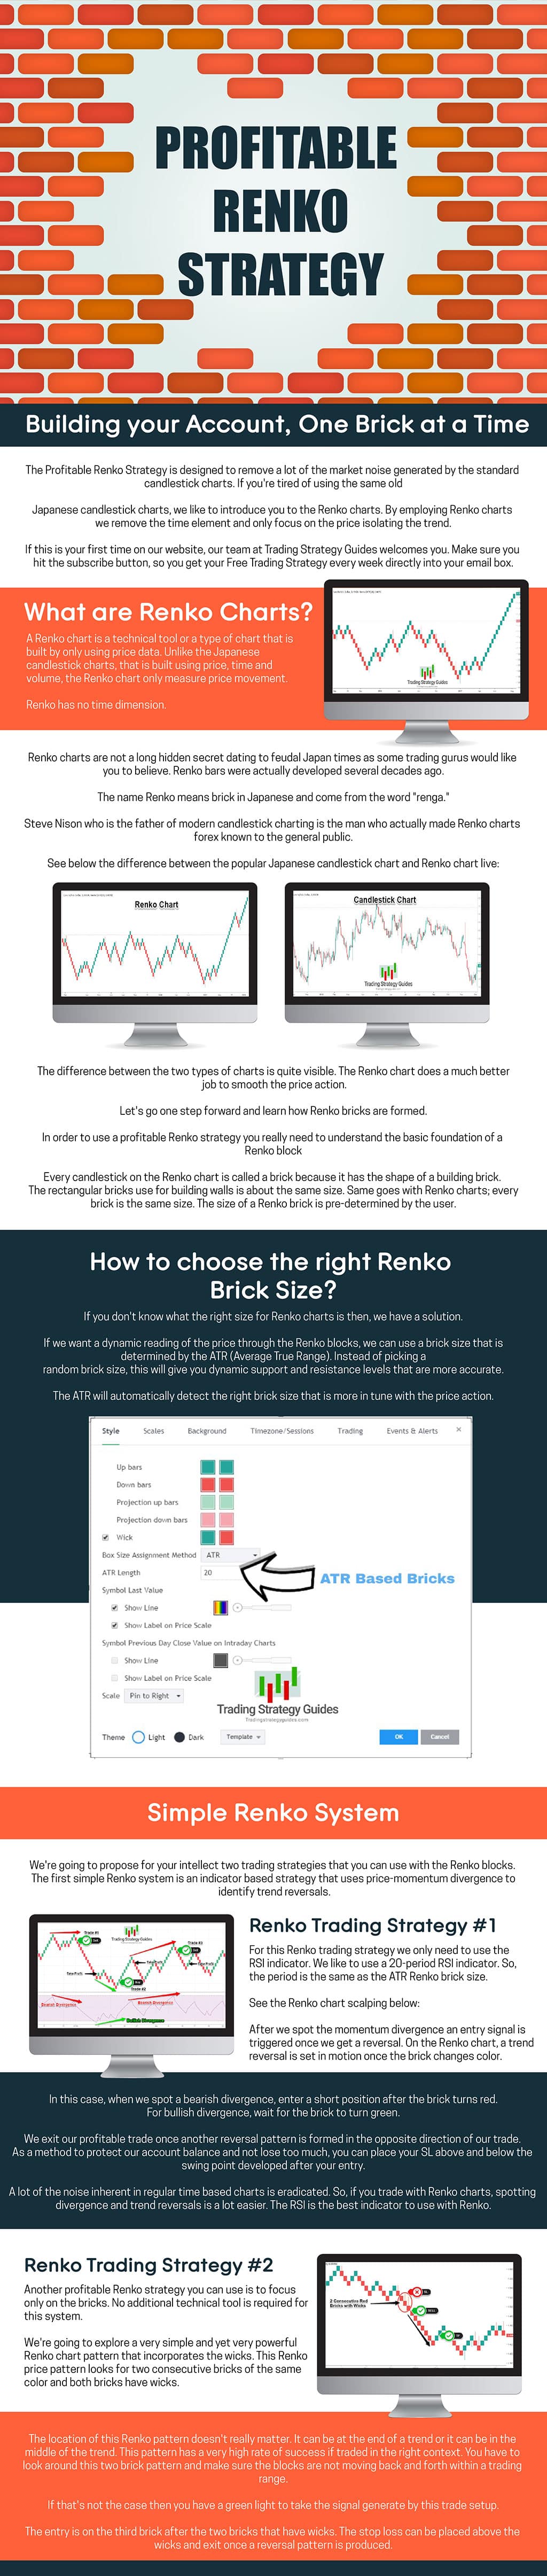 Profitable Renko Trading Strategy Guide Infographic